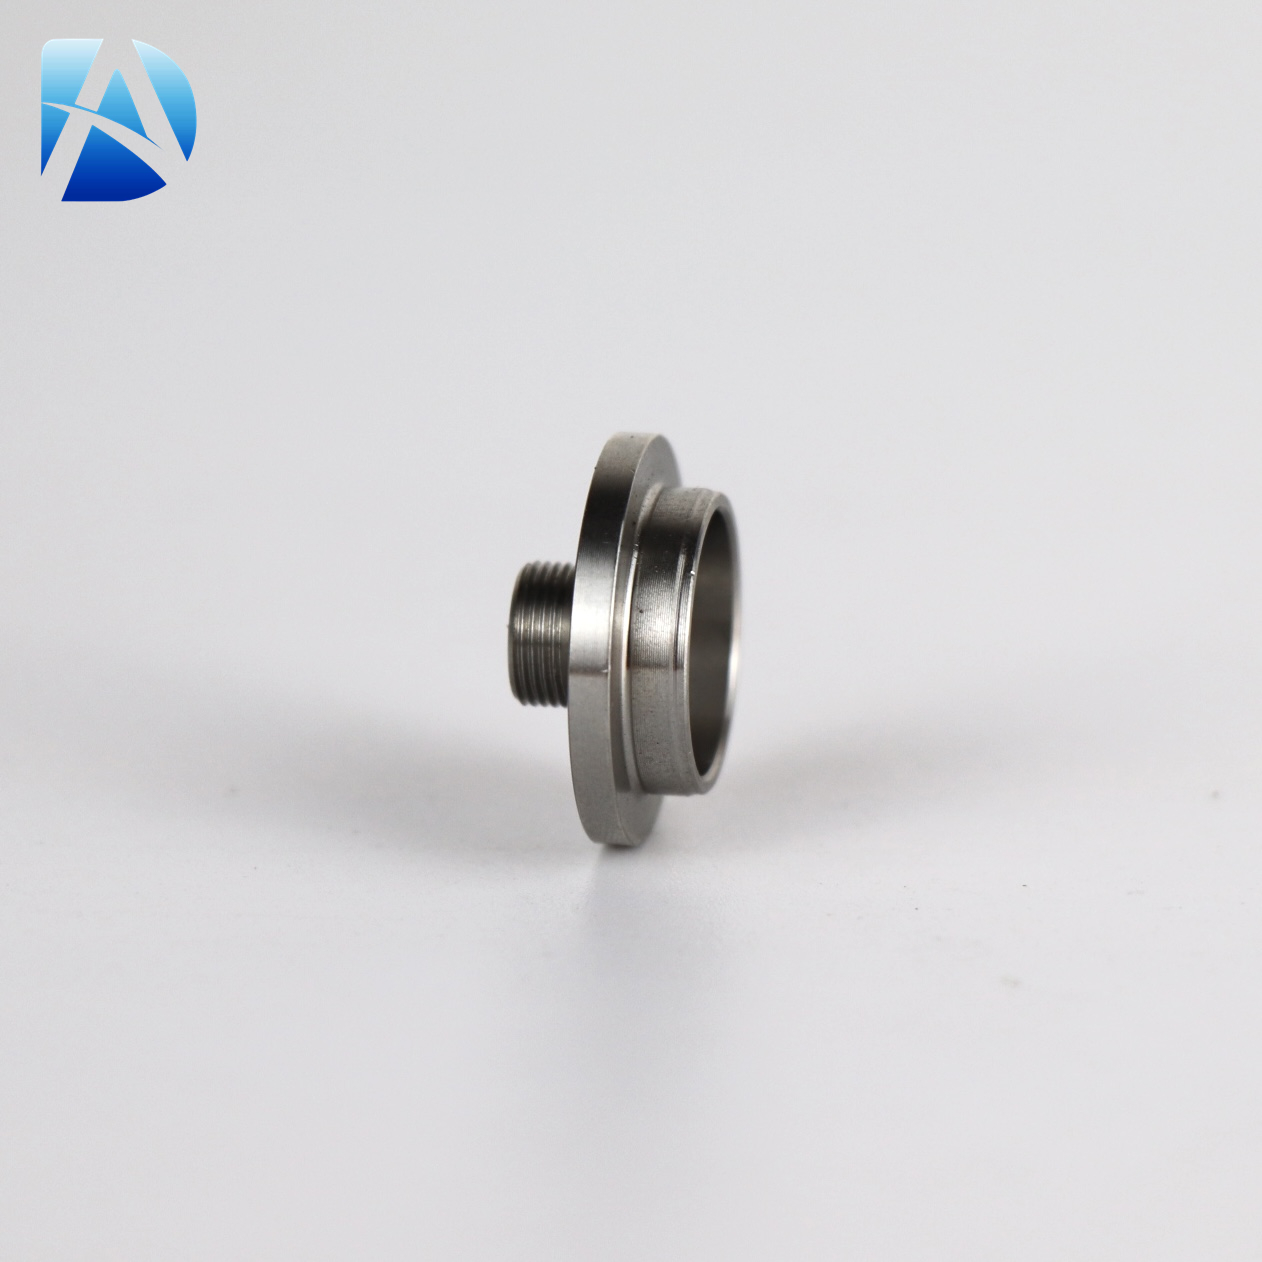 Precision CNC Milling Parts for Nuts And Bolts, Aluminum And Stainless Steel Auto Parts